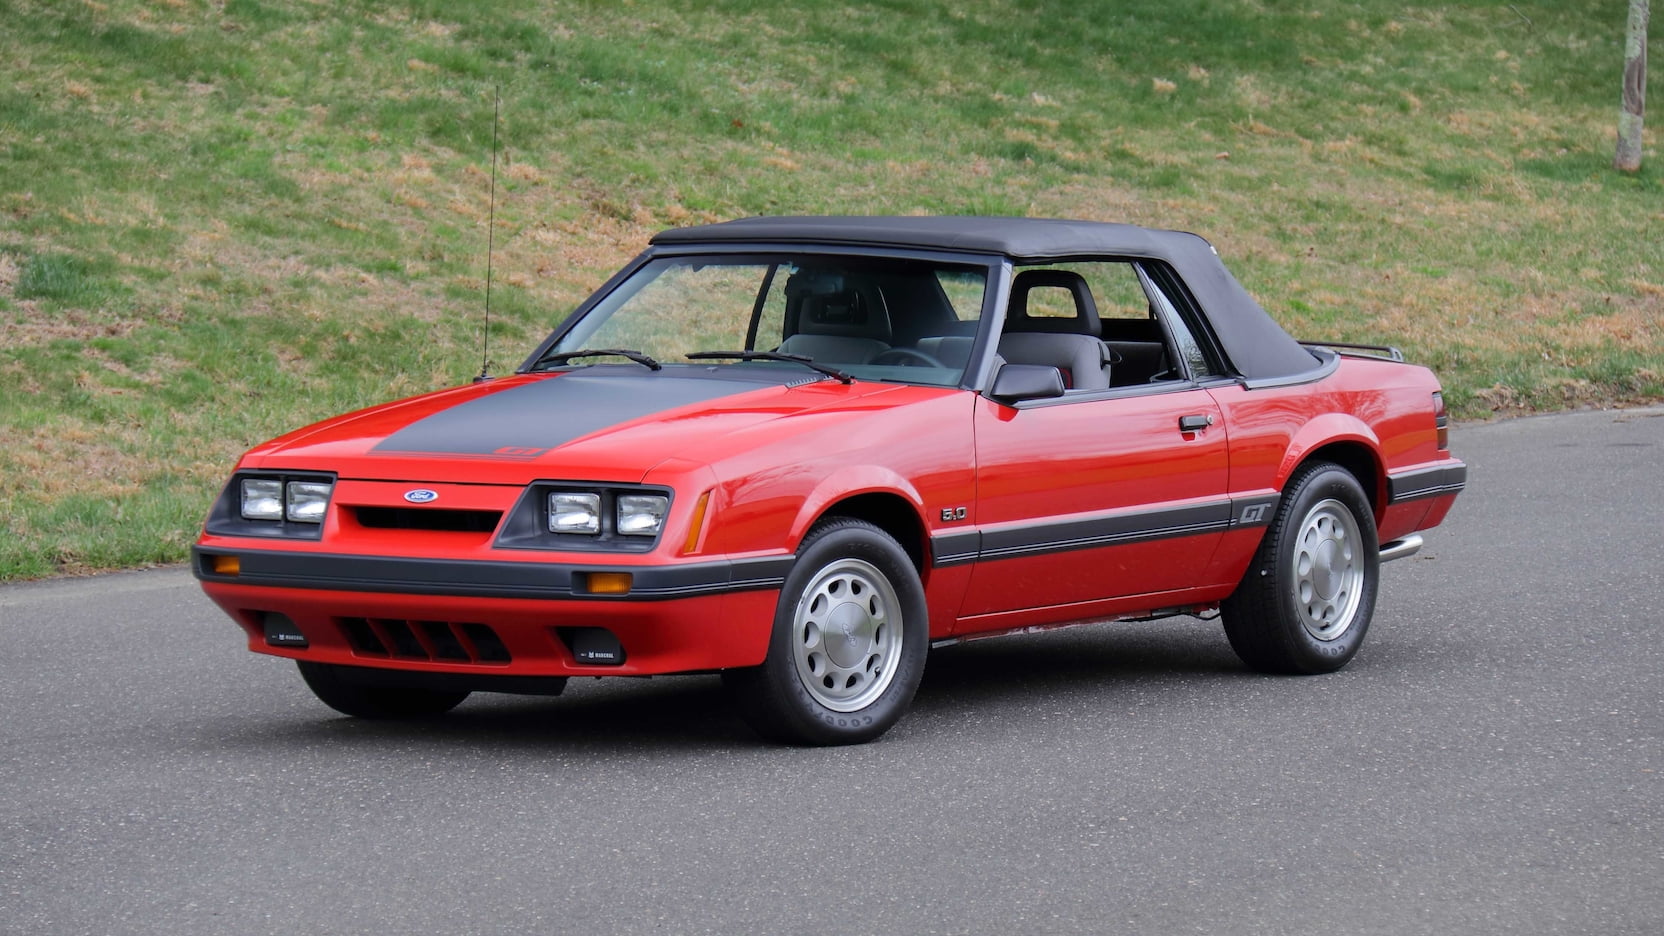 Medium Canyon Red 1986 Ford Mustang